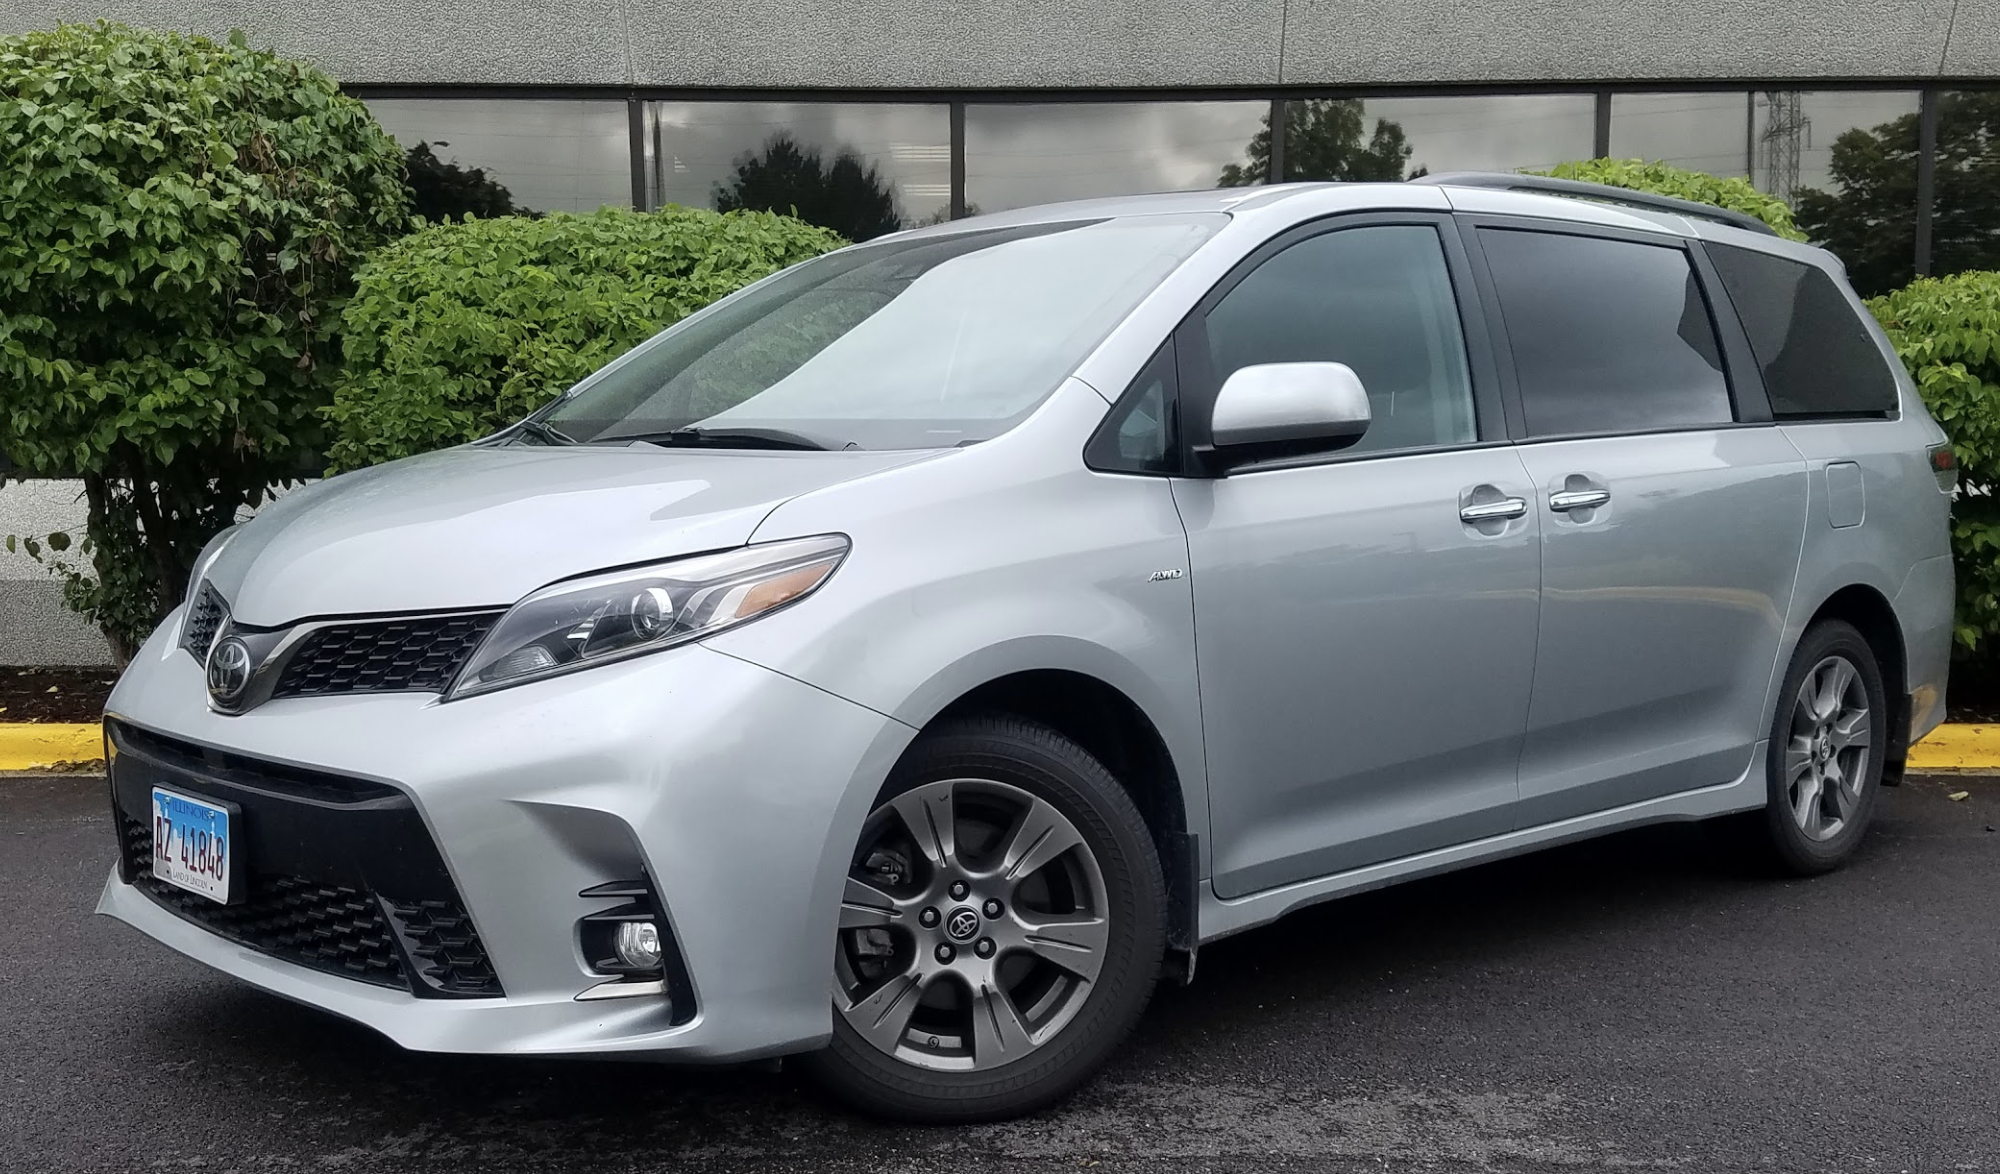 2019 Toyota Sienna SE Premium AWD The Daily Drive | Consumer Guide®